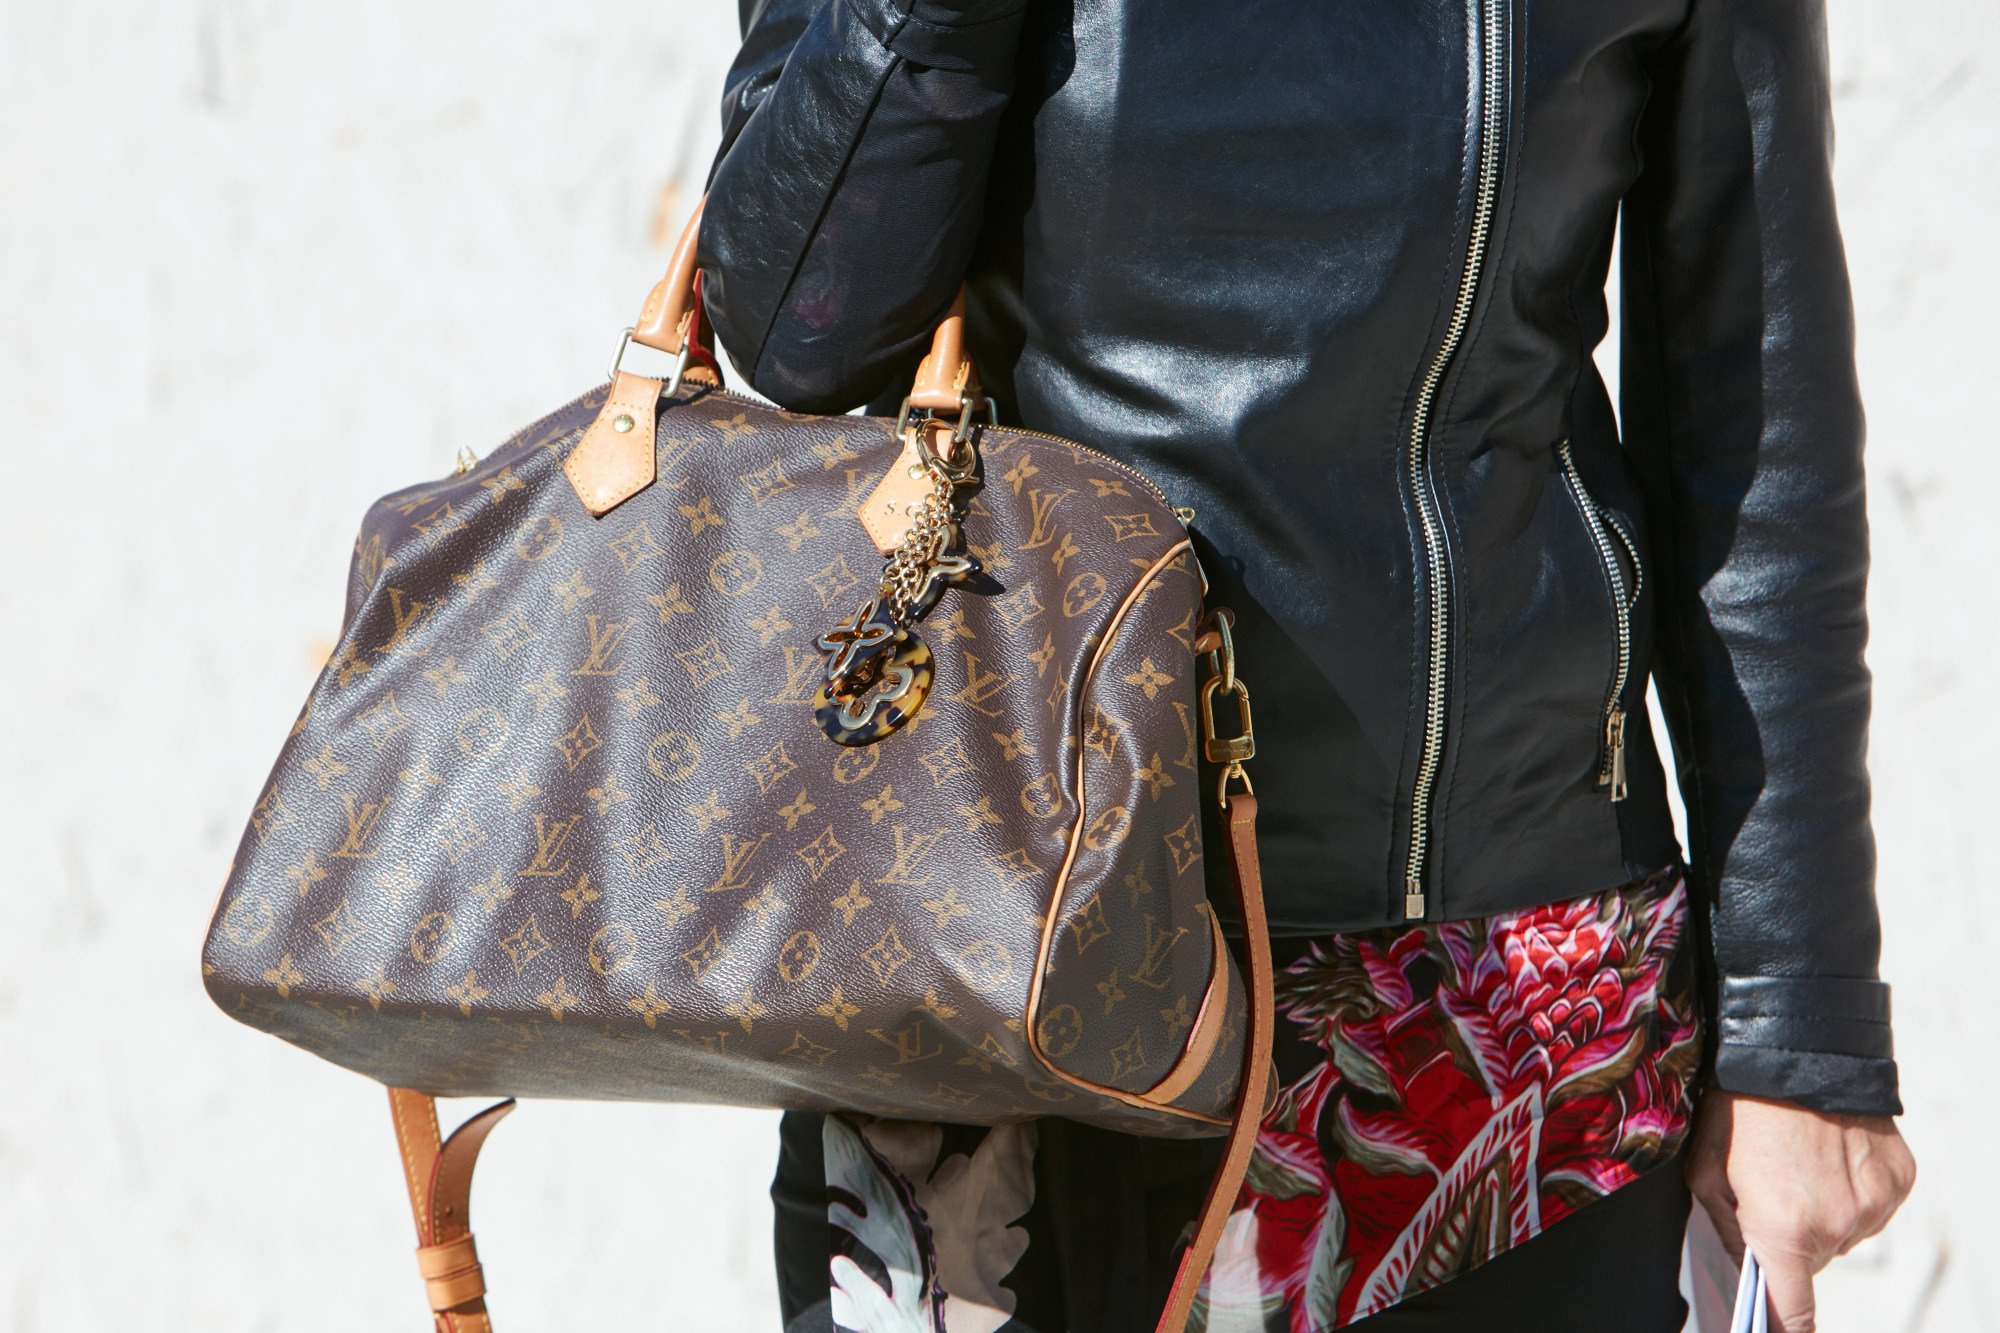 NEW PRICES of Bags at LOUIS VUITTON, after the February 2022 Price Increase